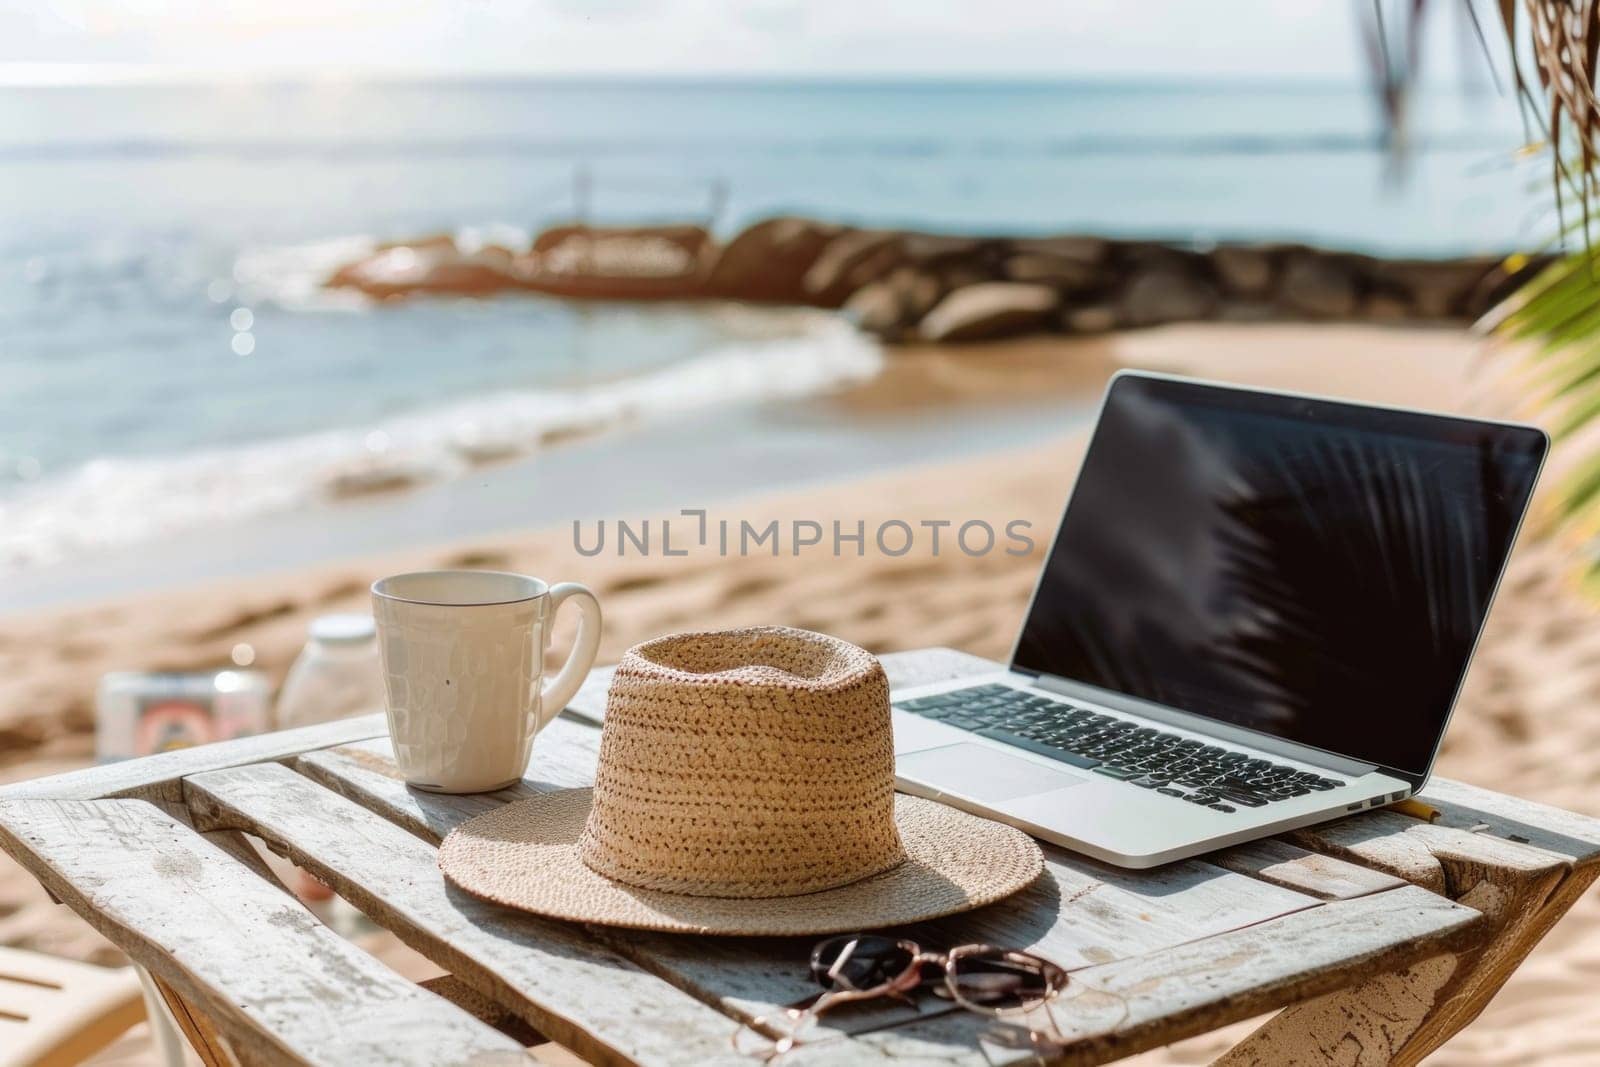 A laptop is open on a table next to a straw hat and a cup.